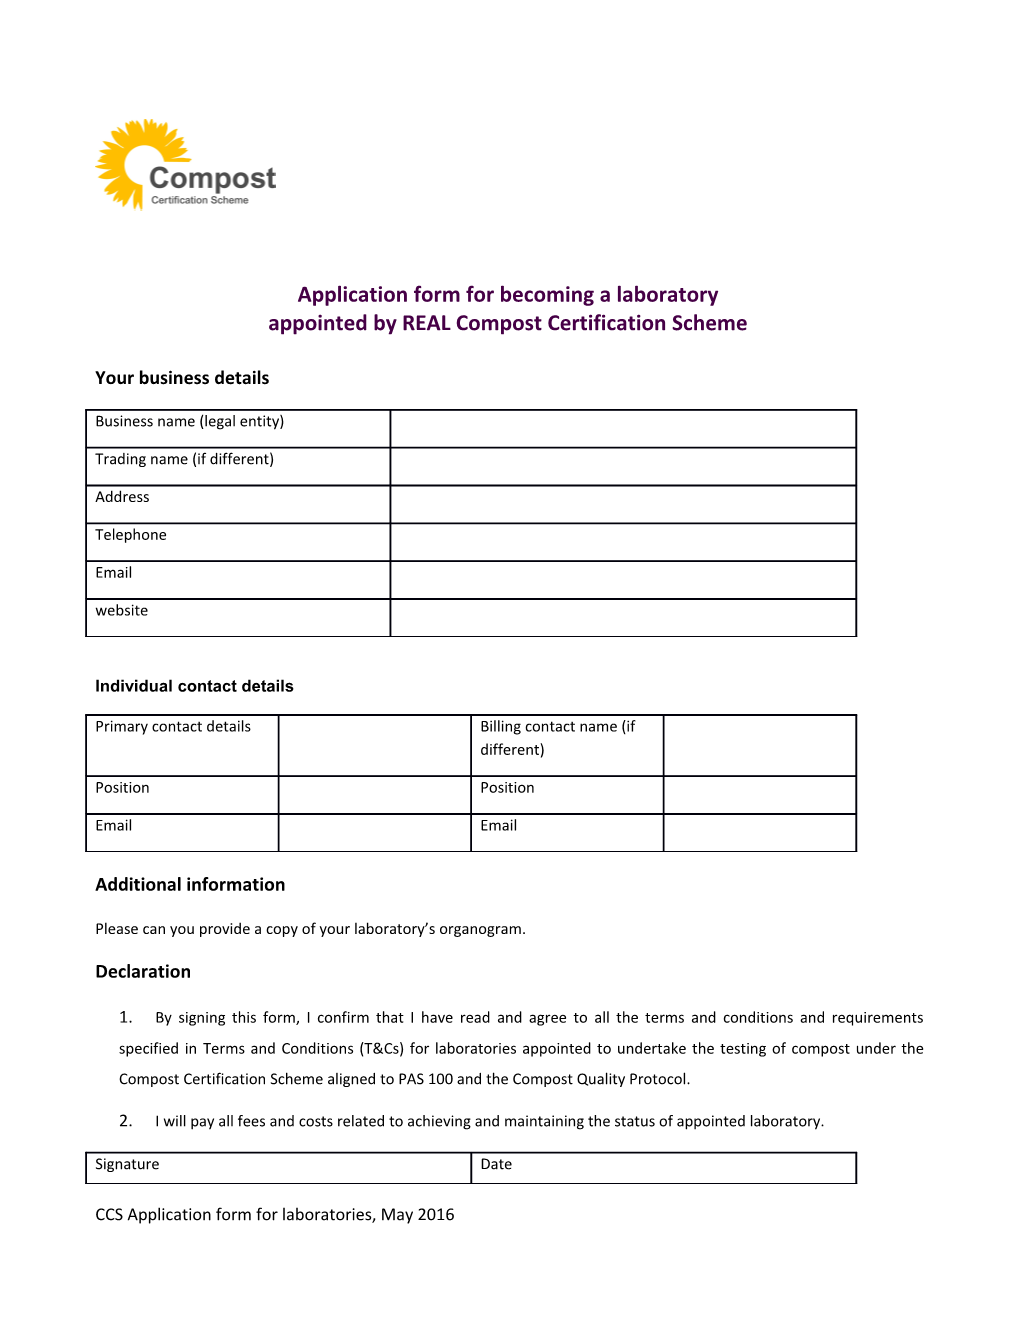 Application Form for Becoming a Laboratory Appointed by REAL Compost Certification Scheme